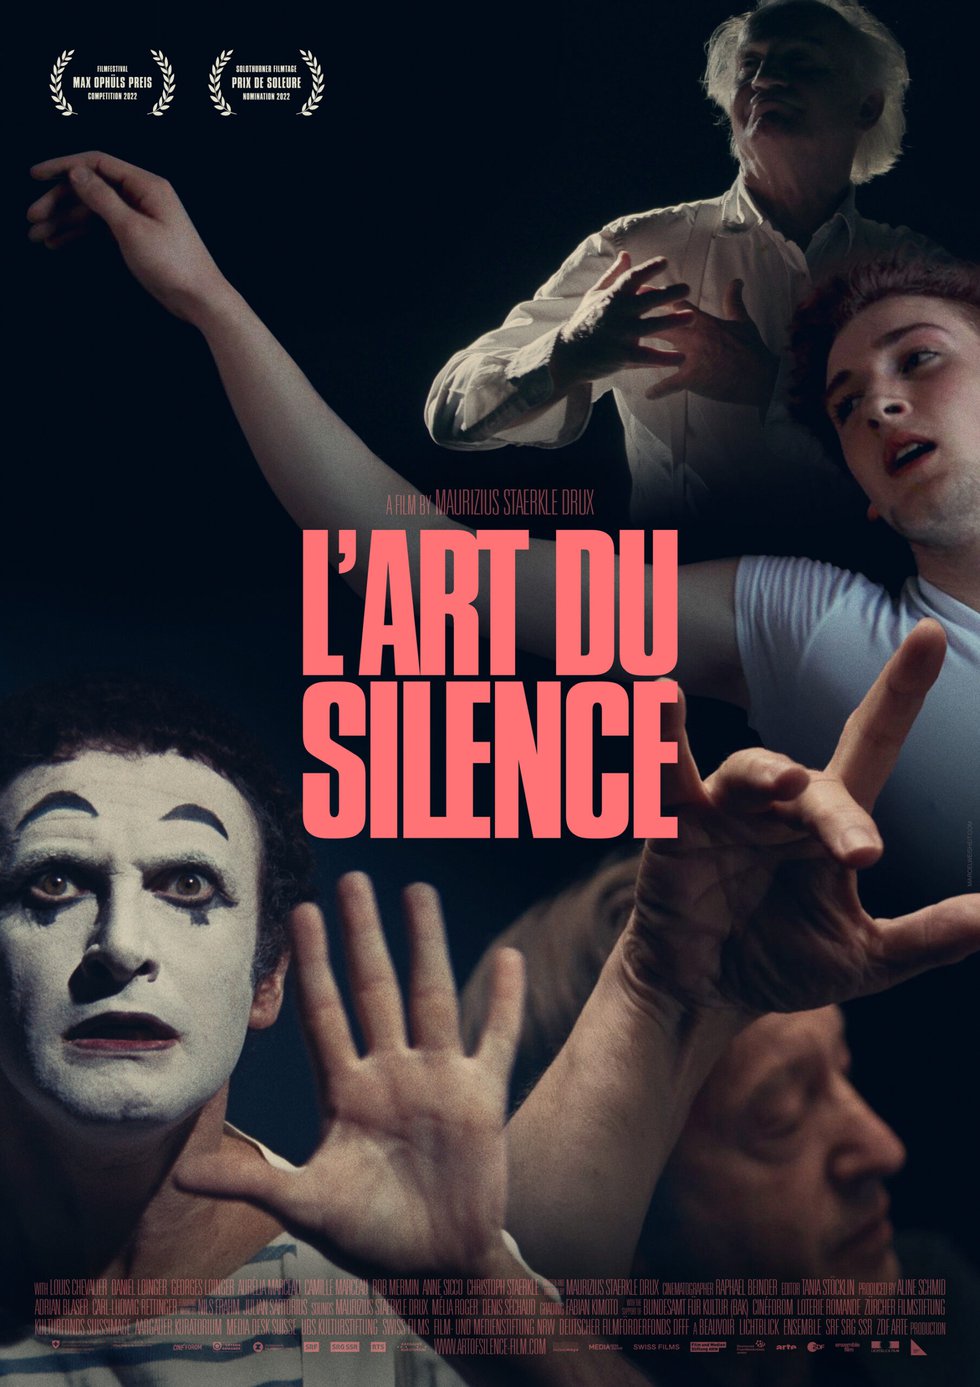 The Art of Silence Theatre Documentary